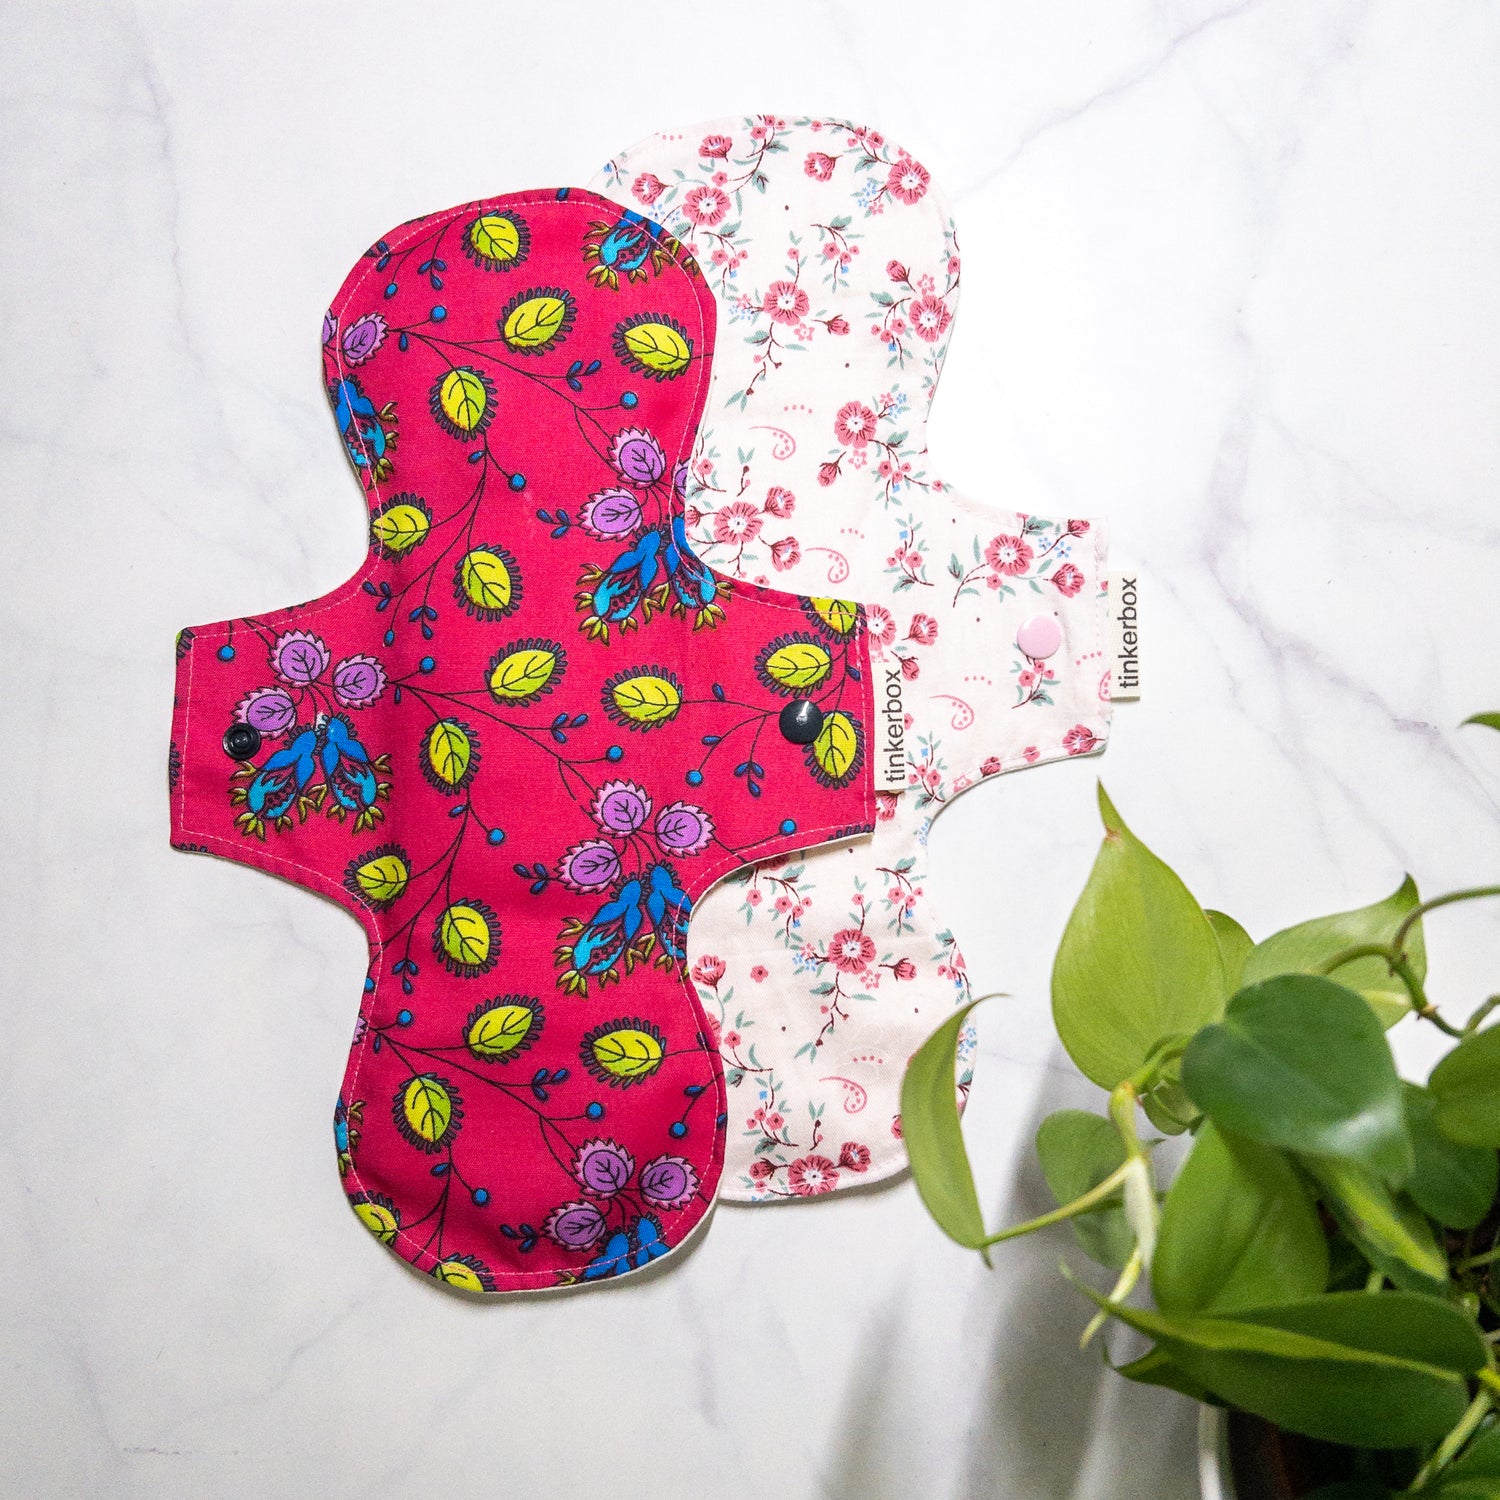 Moderate flow cloth pads